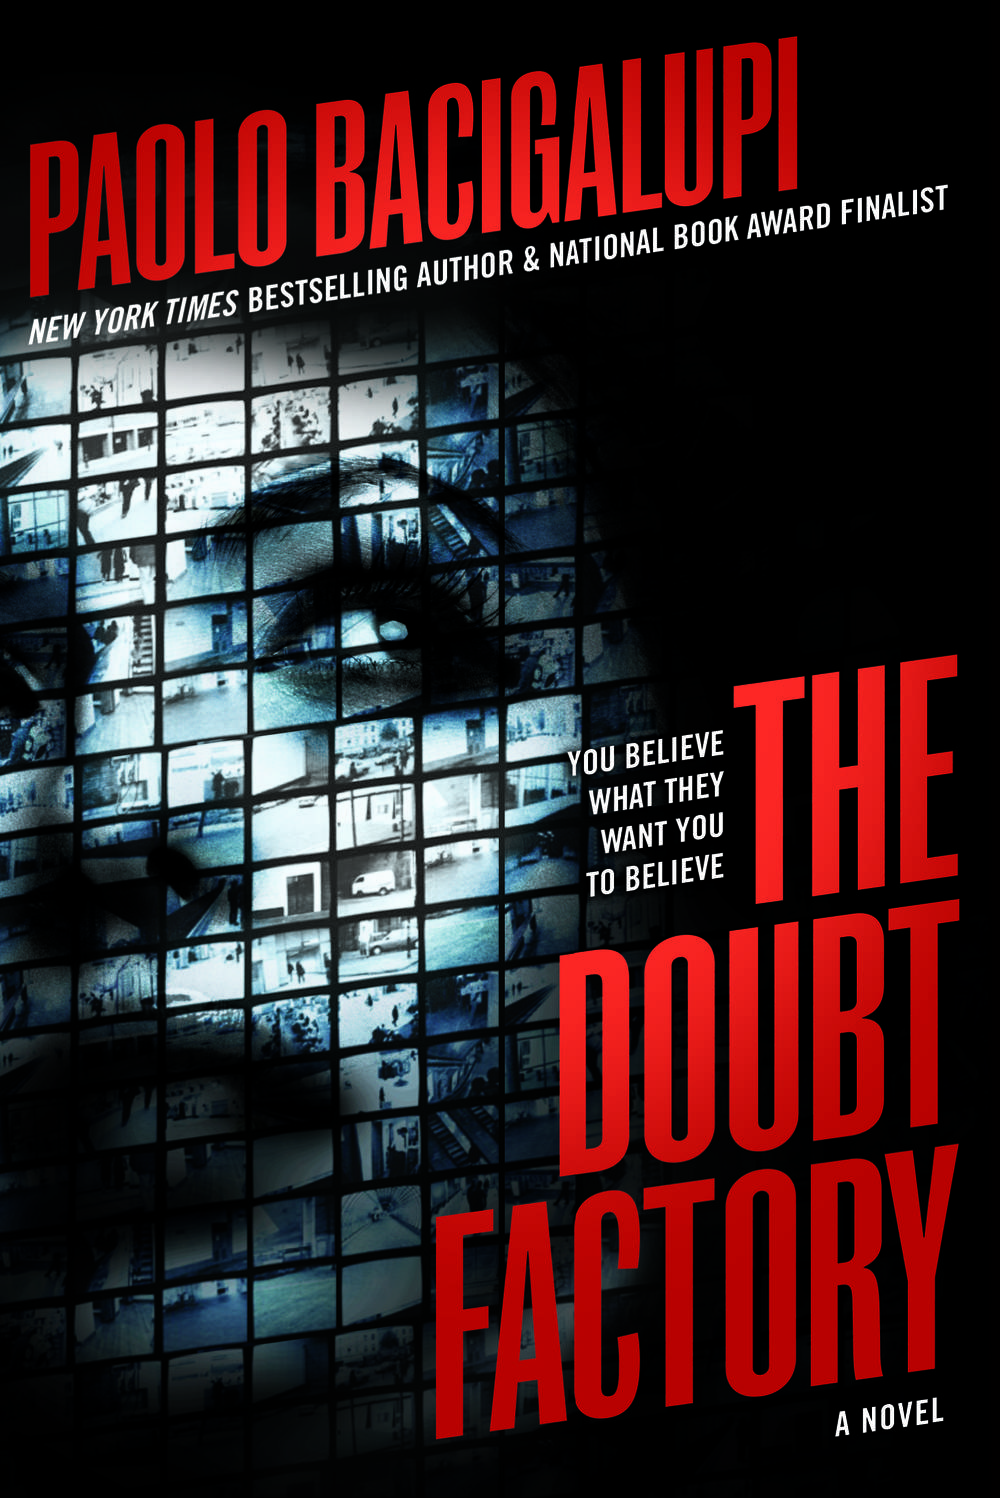 The Doubt Factory by Paolo Bacigalupi - Goodreads